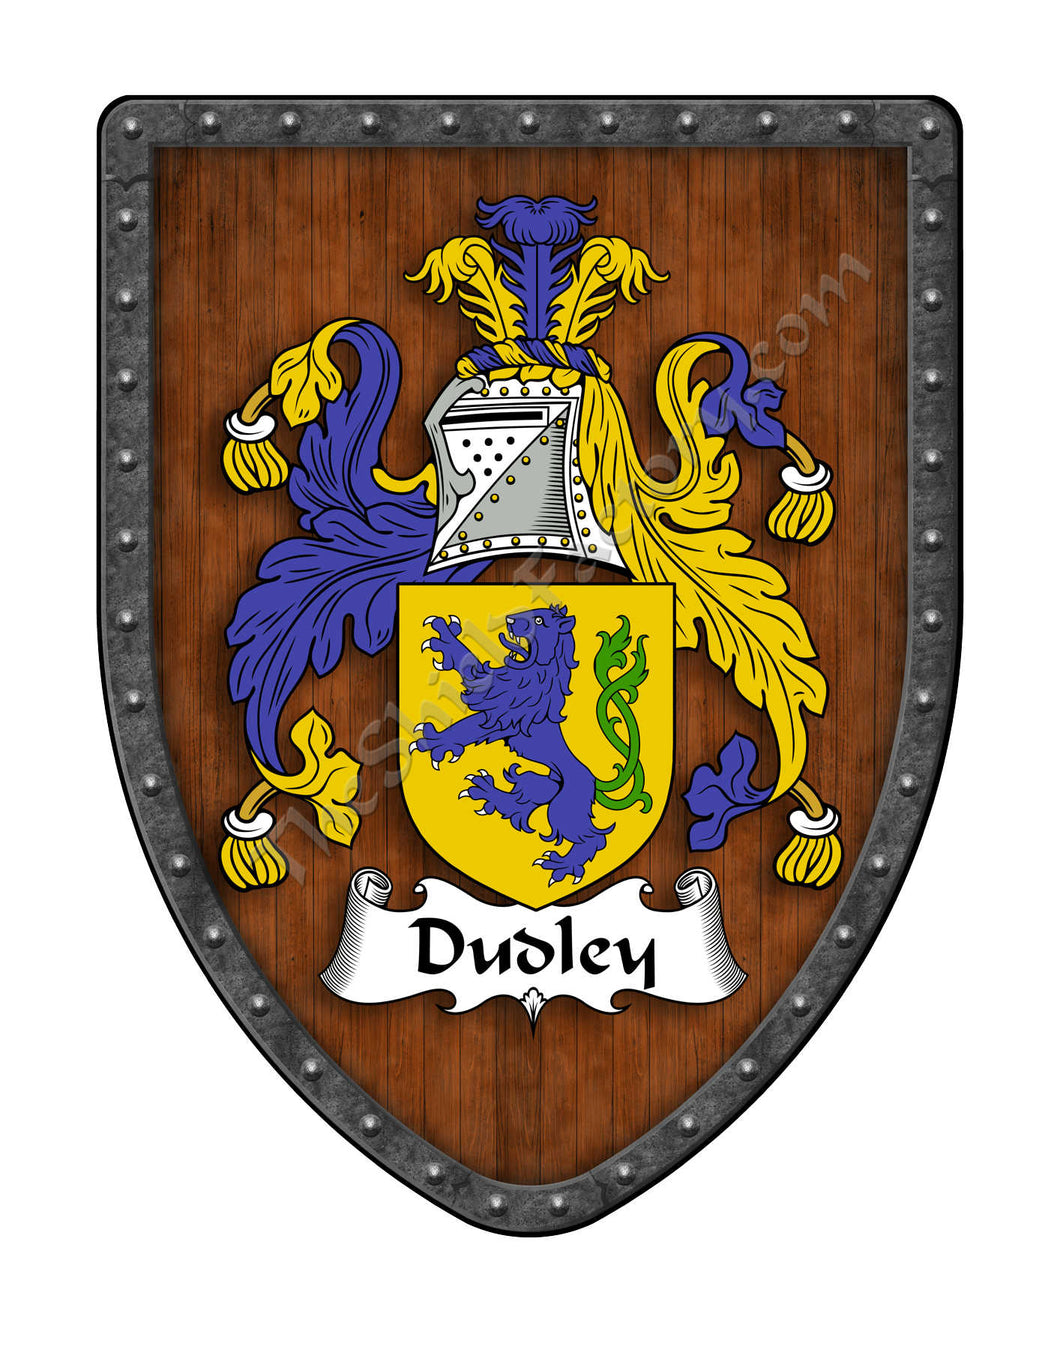 Dudley Family Coat of Arms